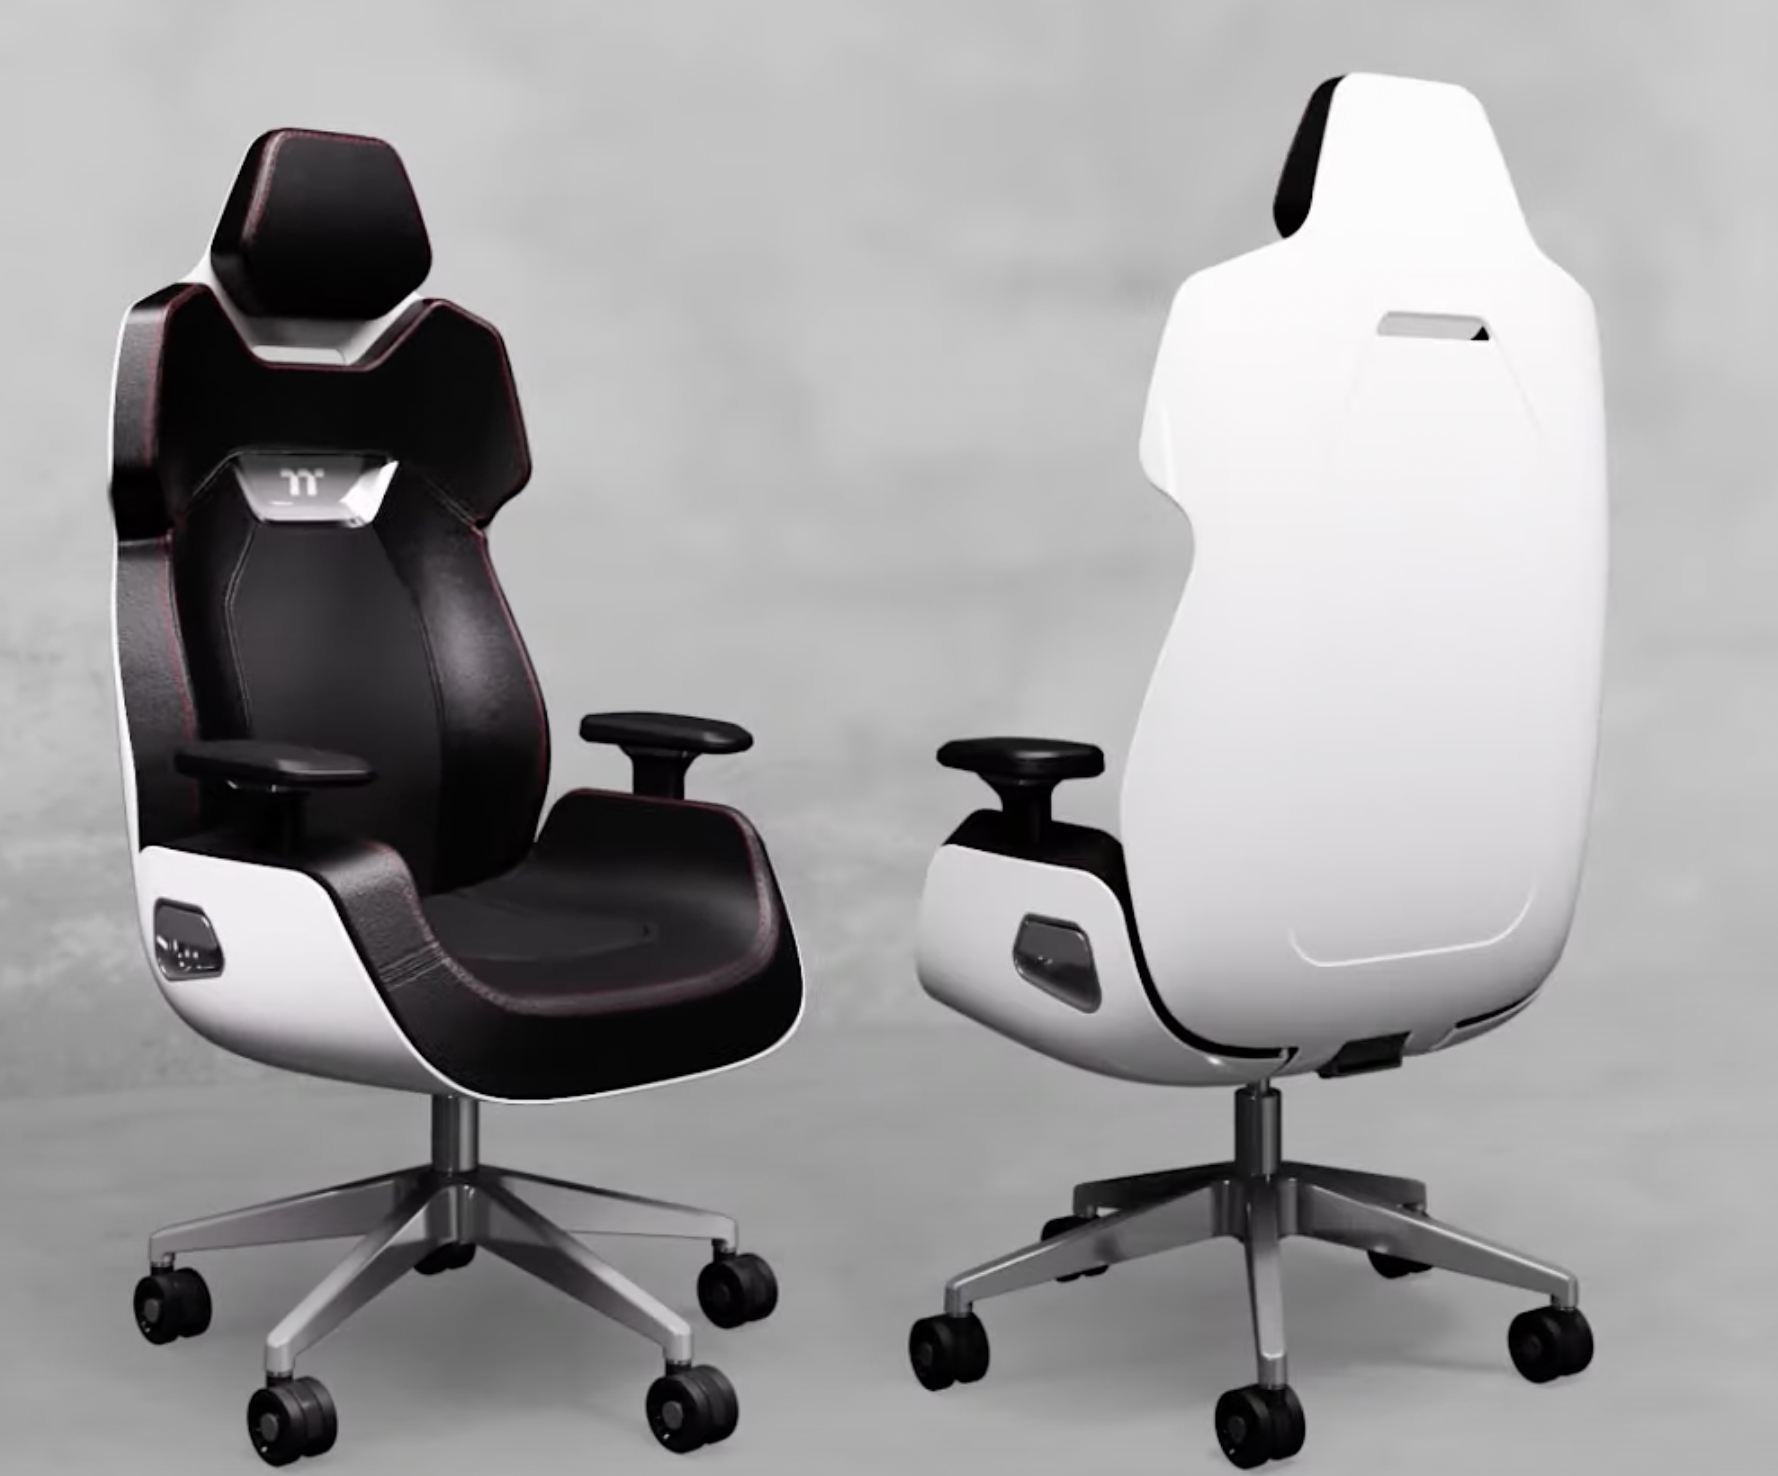 Thermaltake Leather Gaming Chair